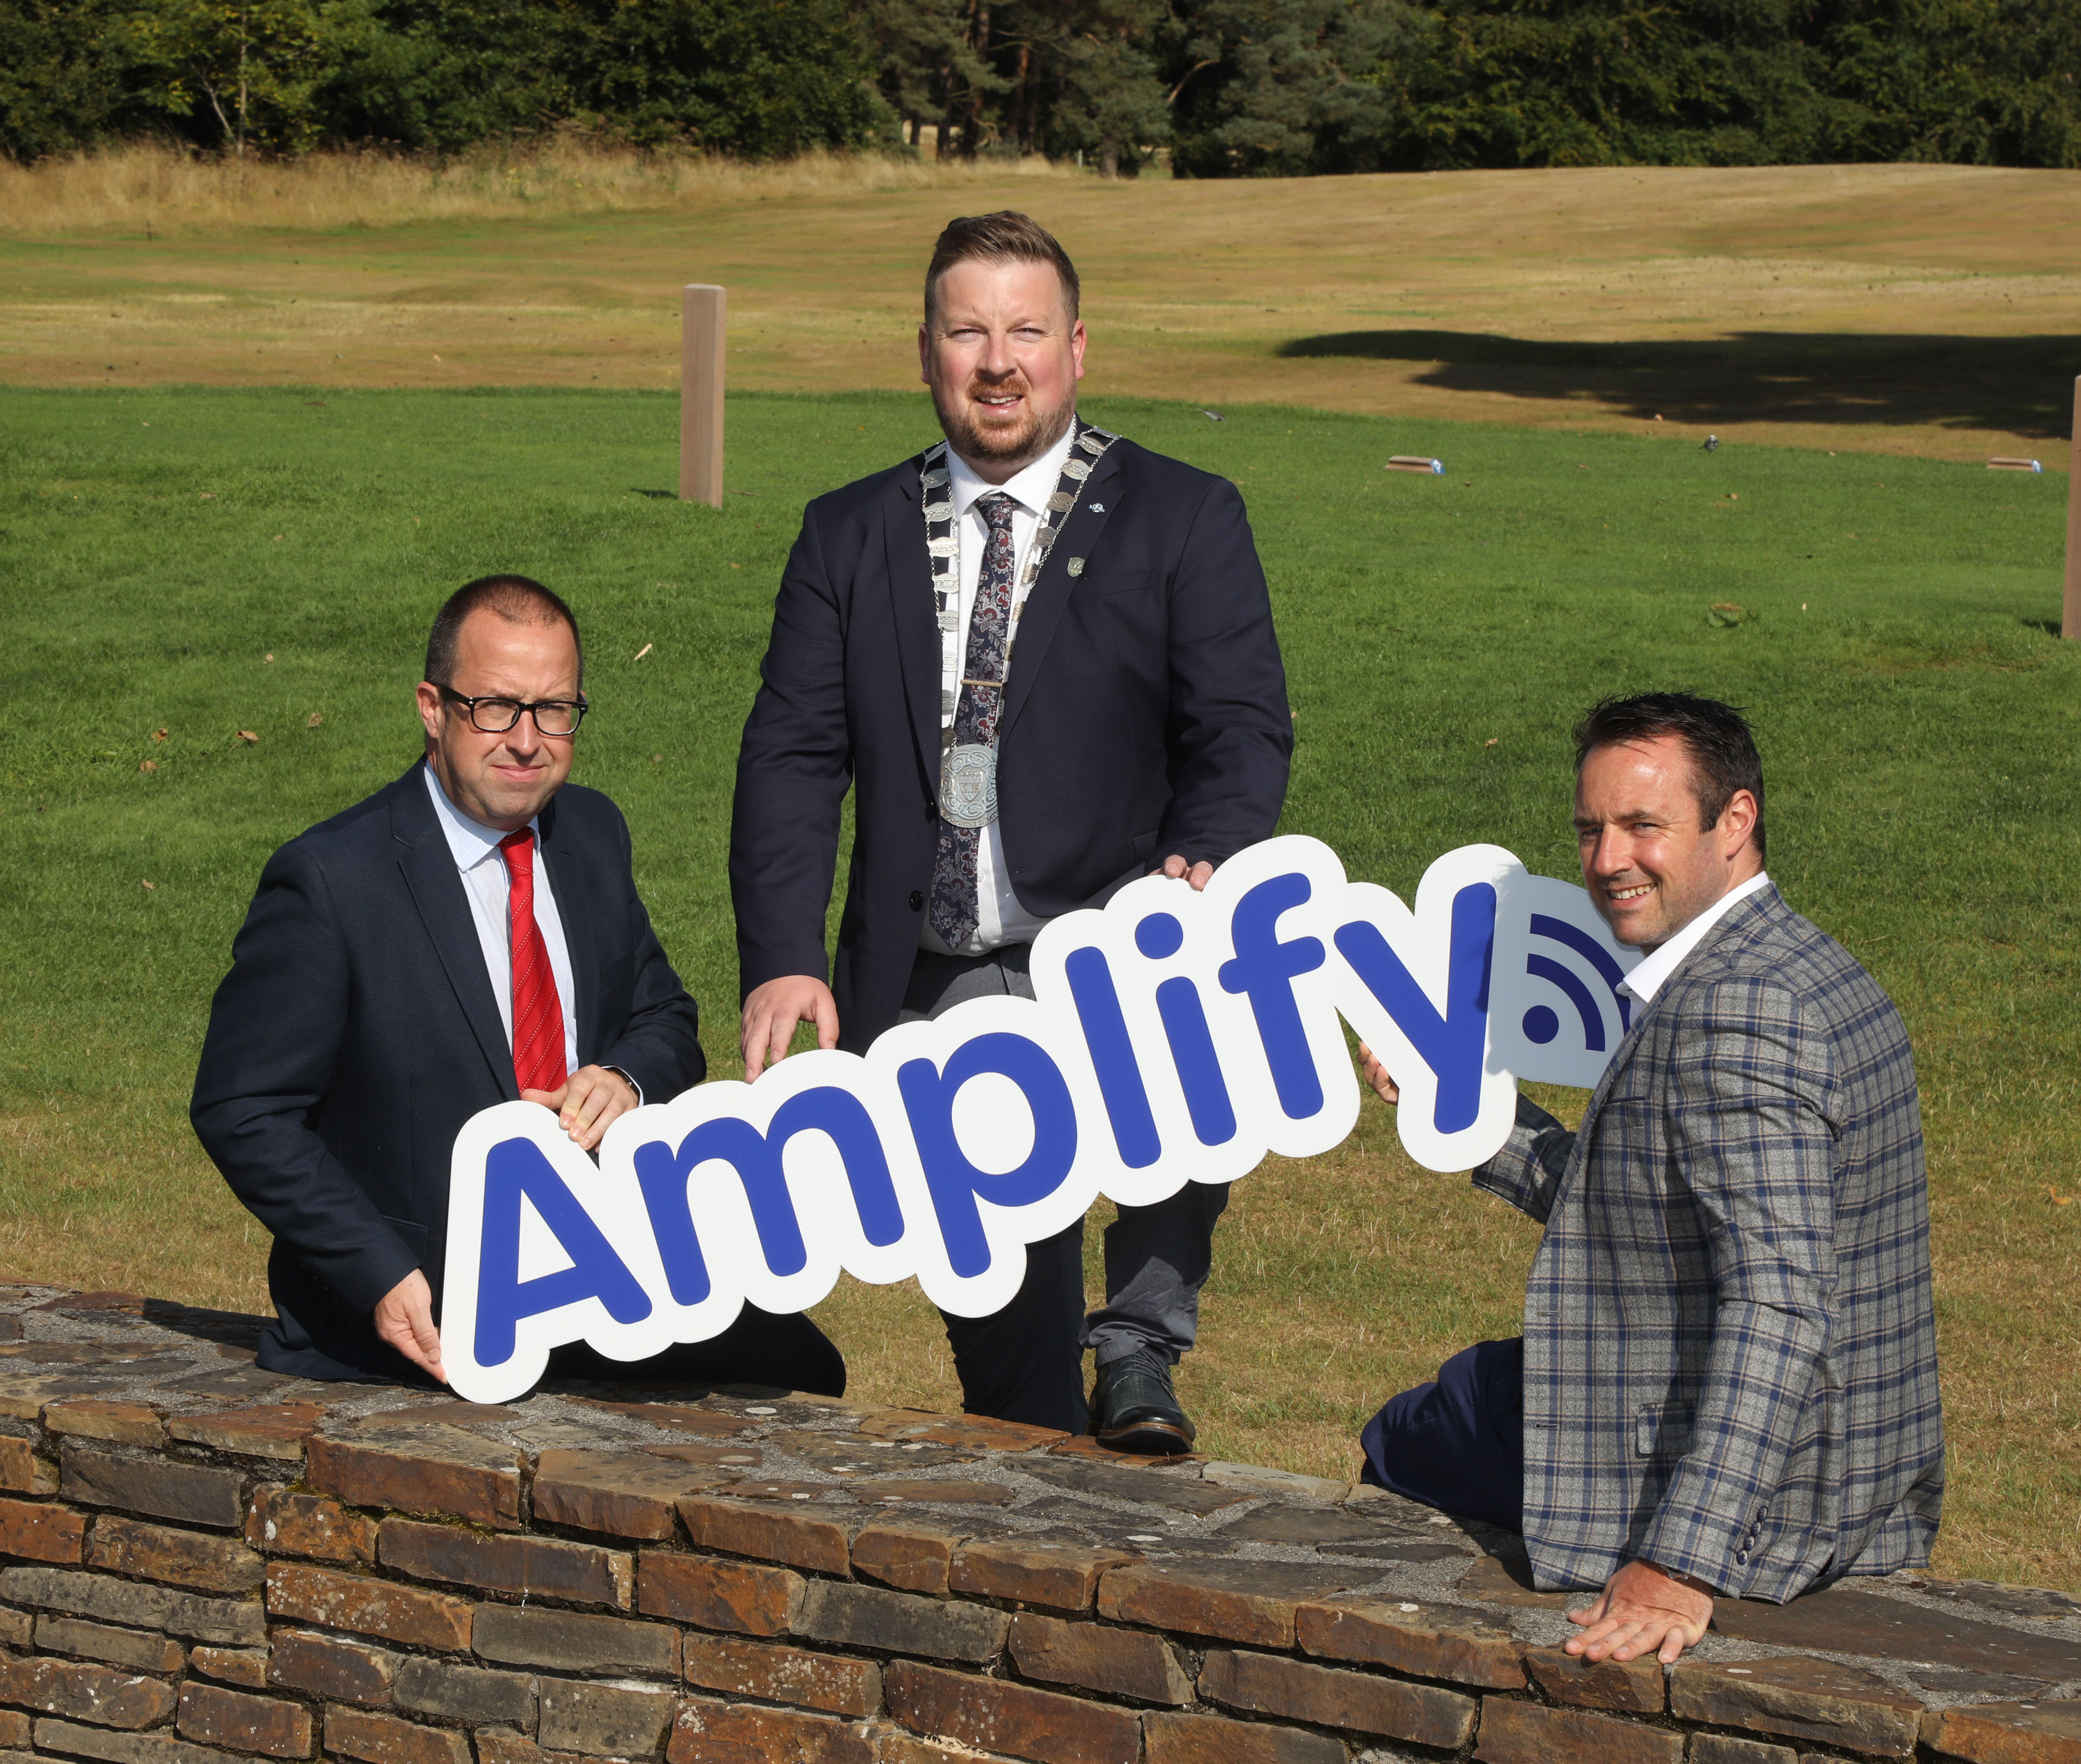 Amplify - A Unique Online recurring Revenue Programme  A unique Online Recurring Revenue Programme has been announced to prepare Carlow SMEs to launch and scale their online membership and subscription offer